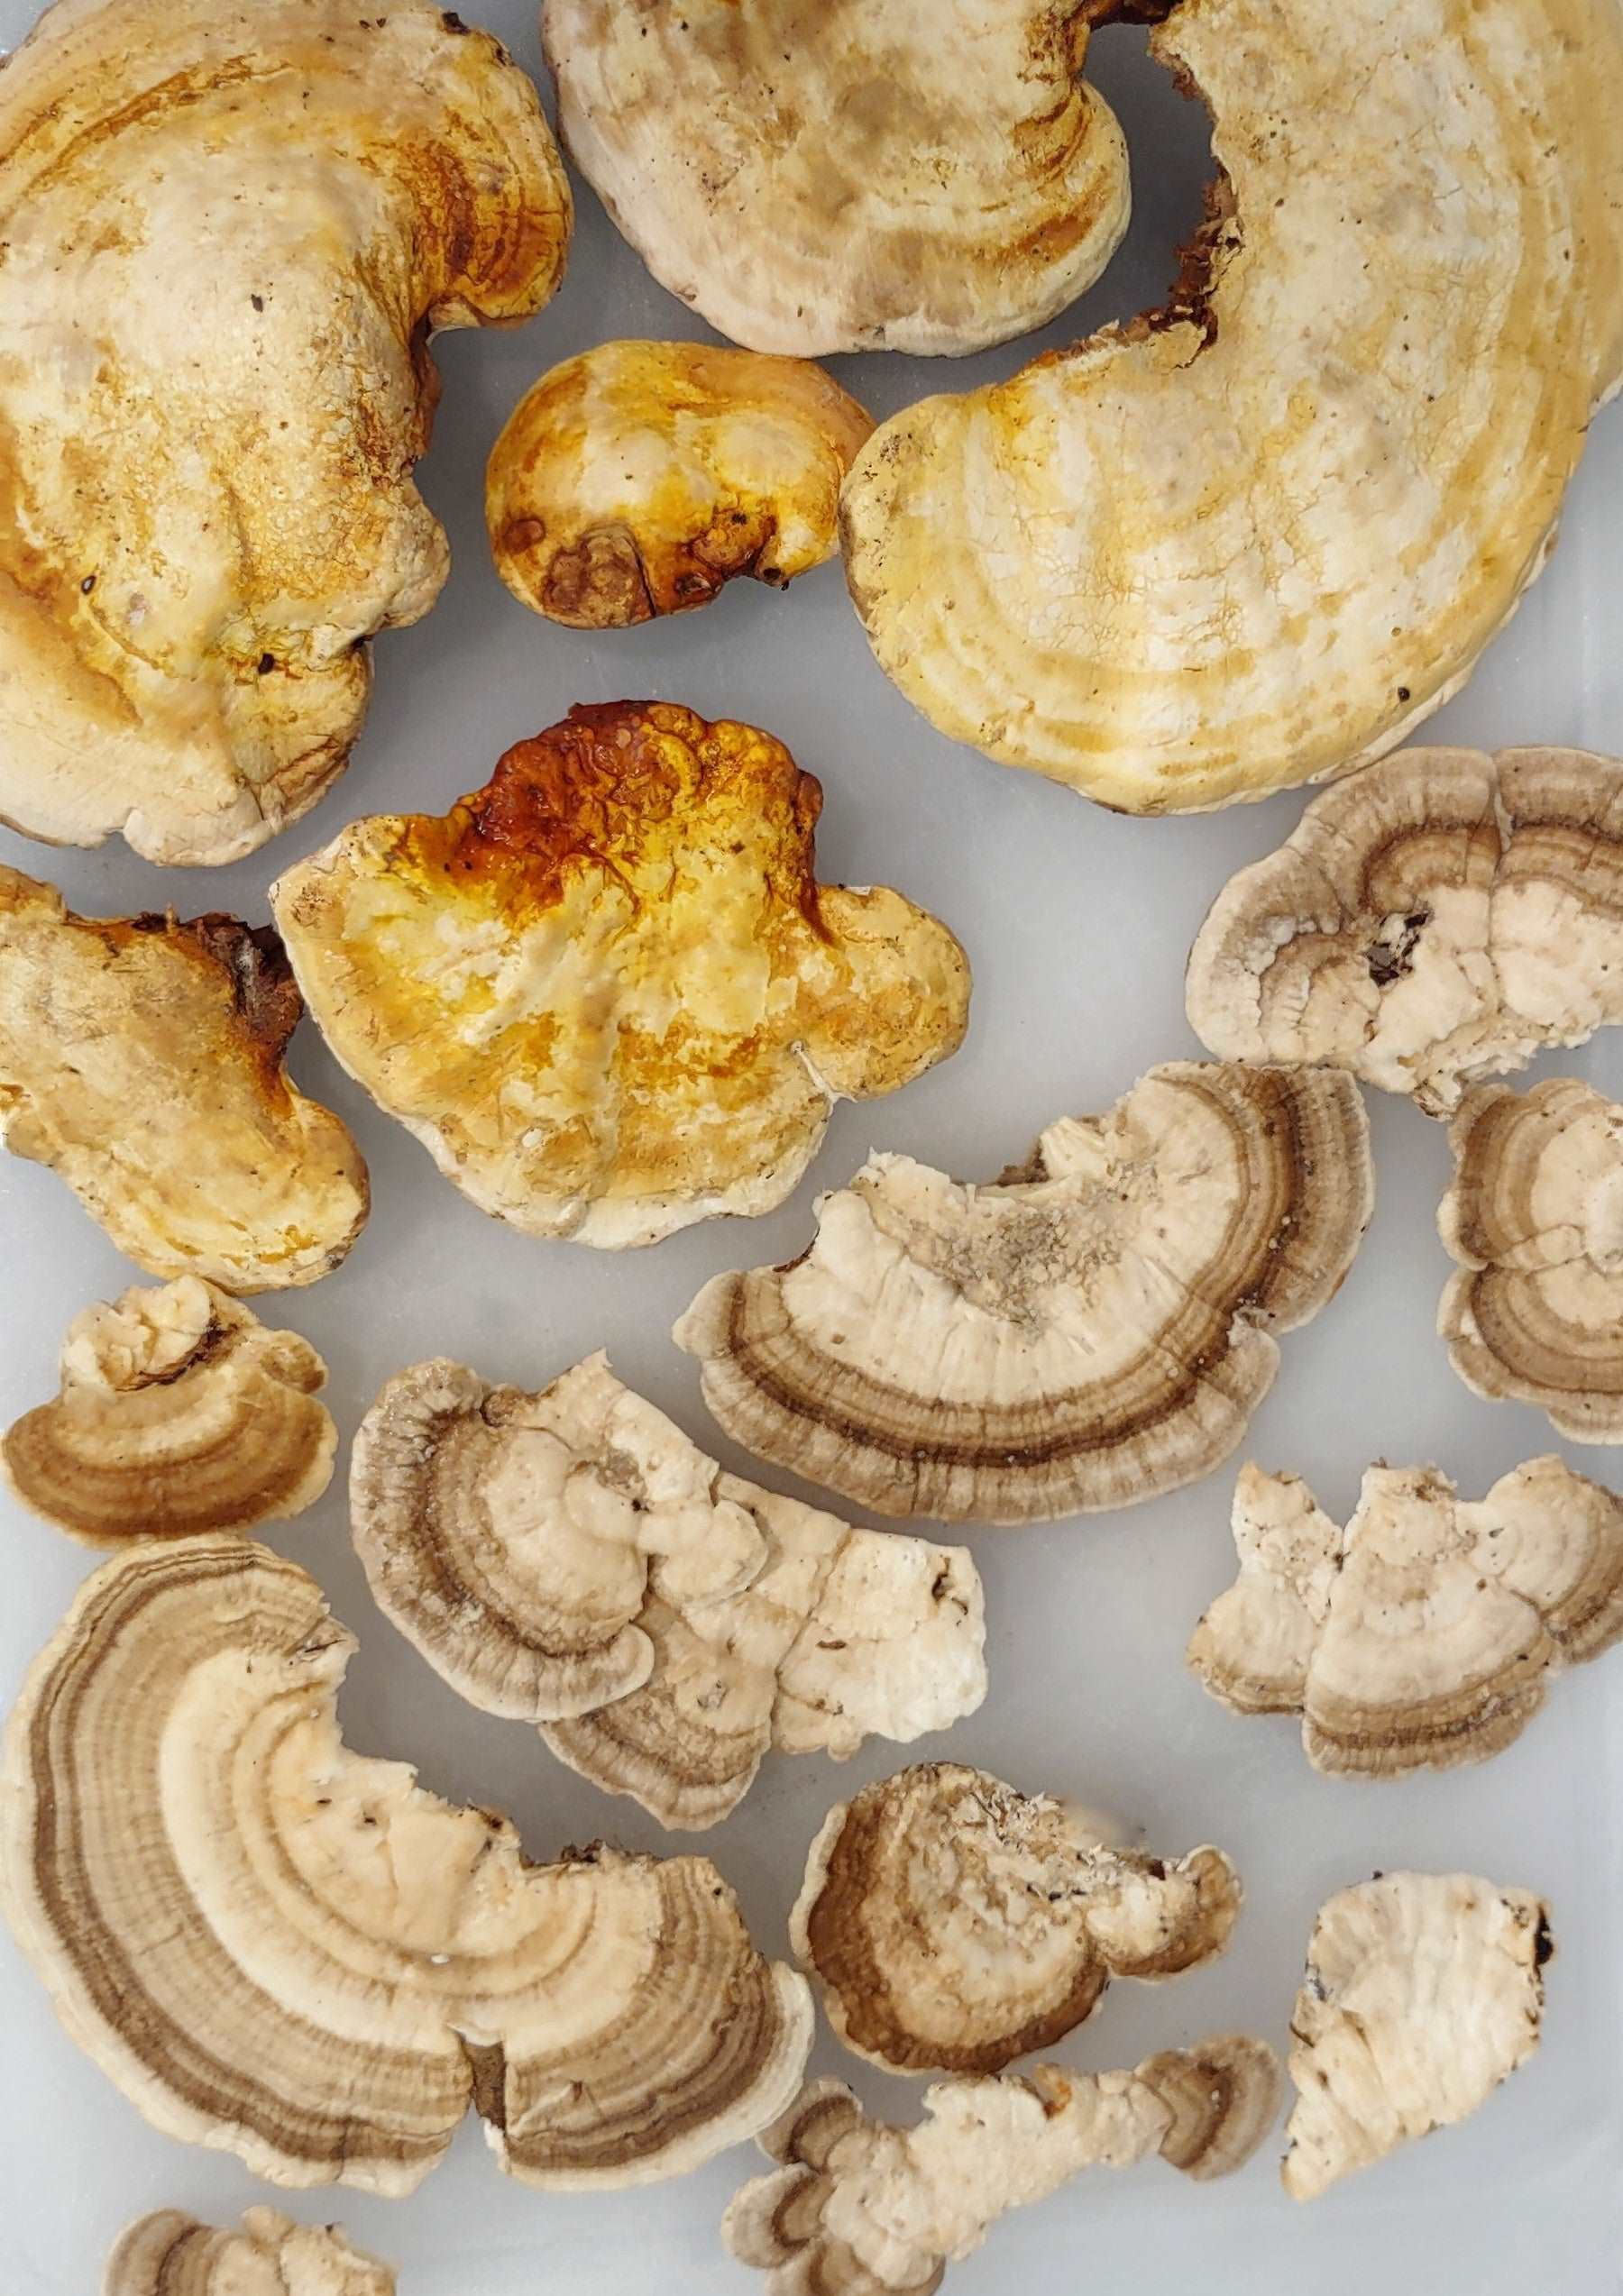 TURKEY TAIL MUSHROOM - DRIED - HARVESTED FROM OUR LAND - Cold Creek Natural Farm